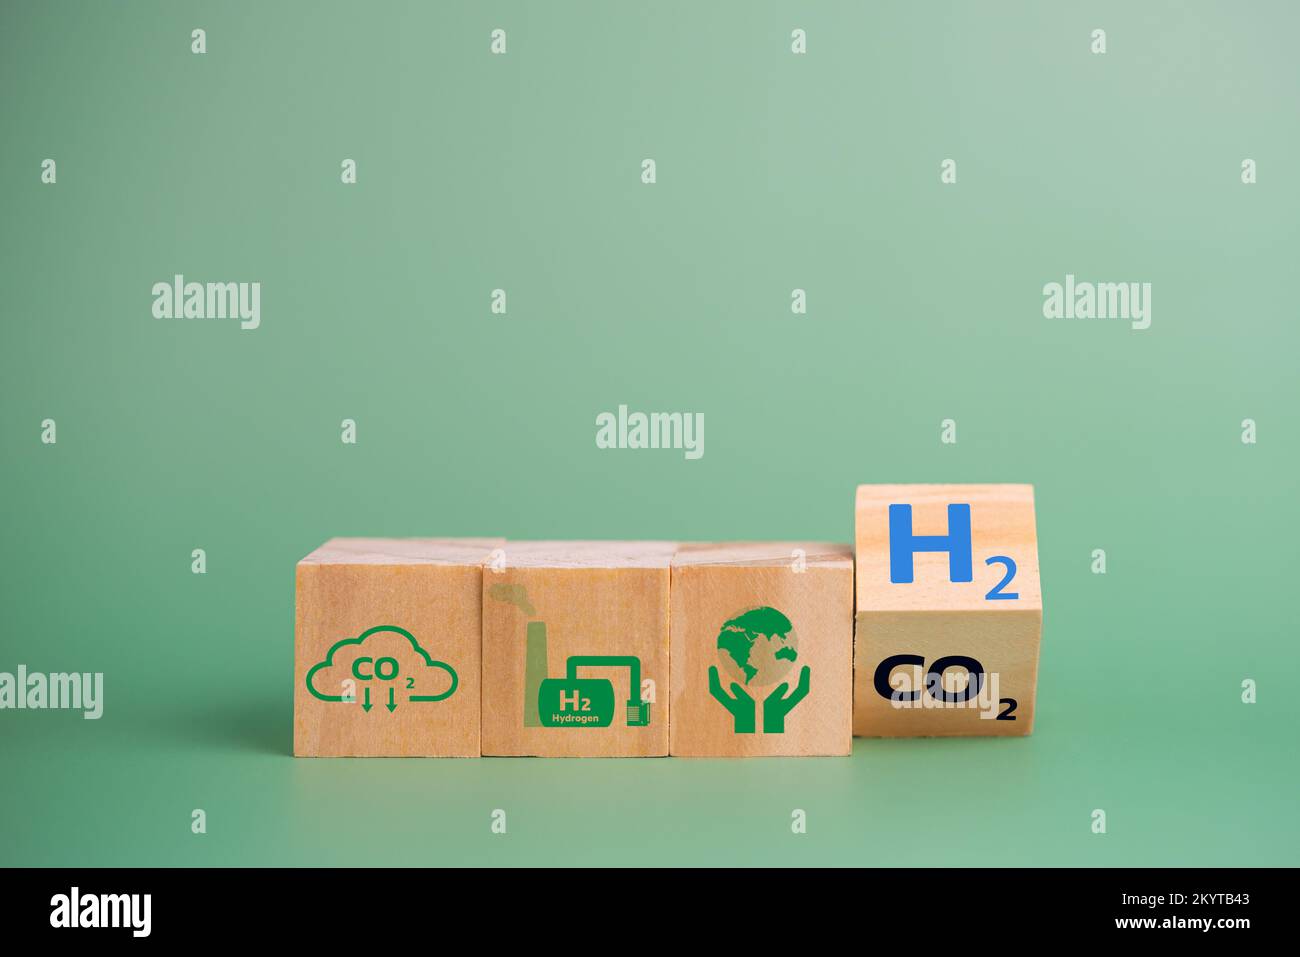 Hydrogen fuel is used to replace carbon dioxide, helping to reduce global warming. wood cube icon H2 hydrogen. Stock Photo